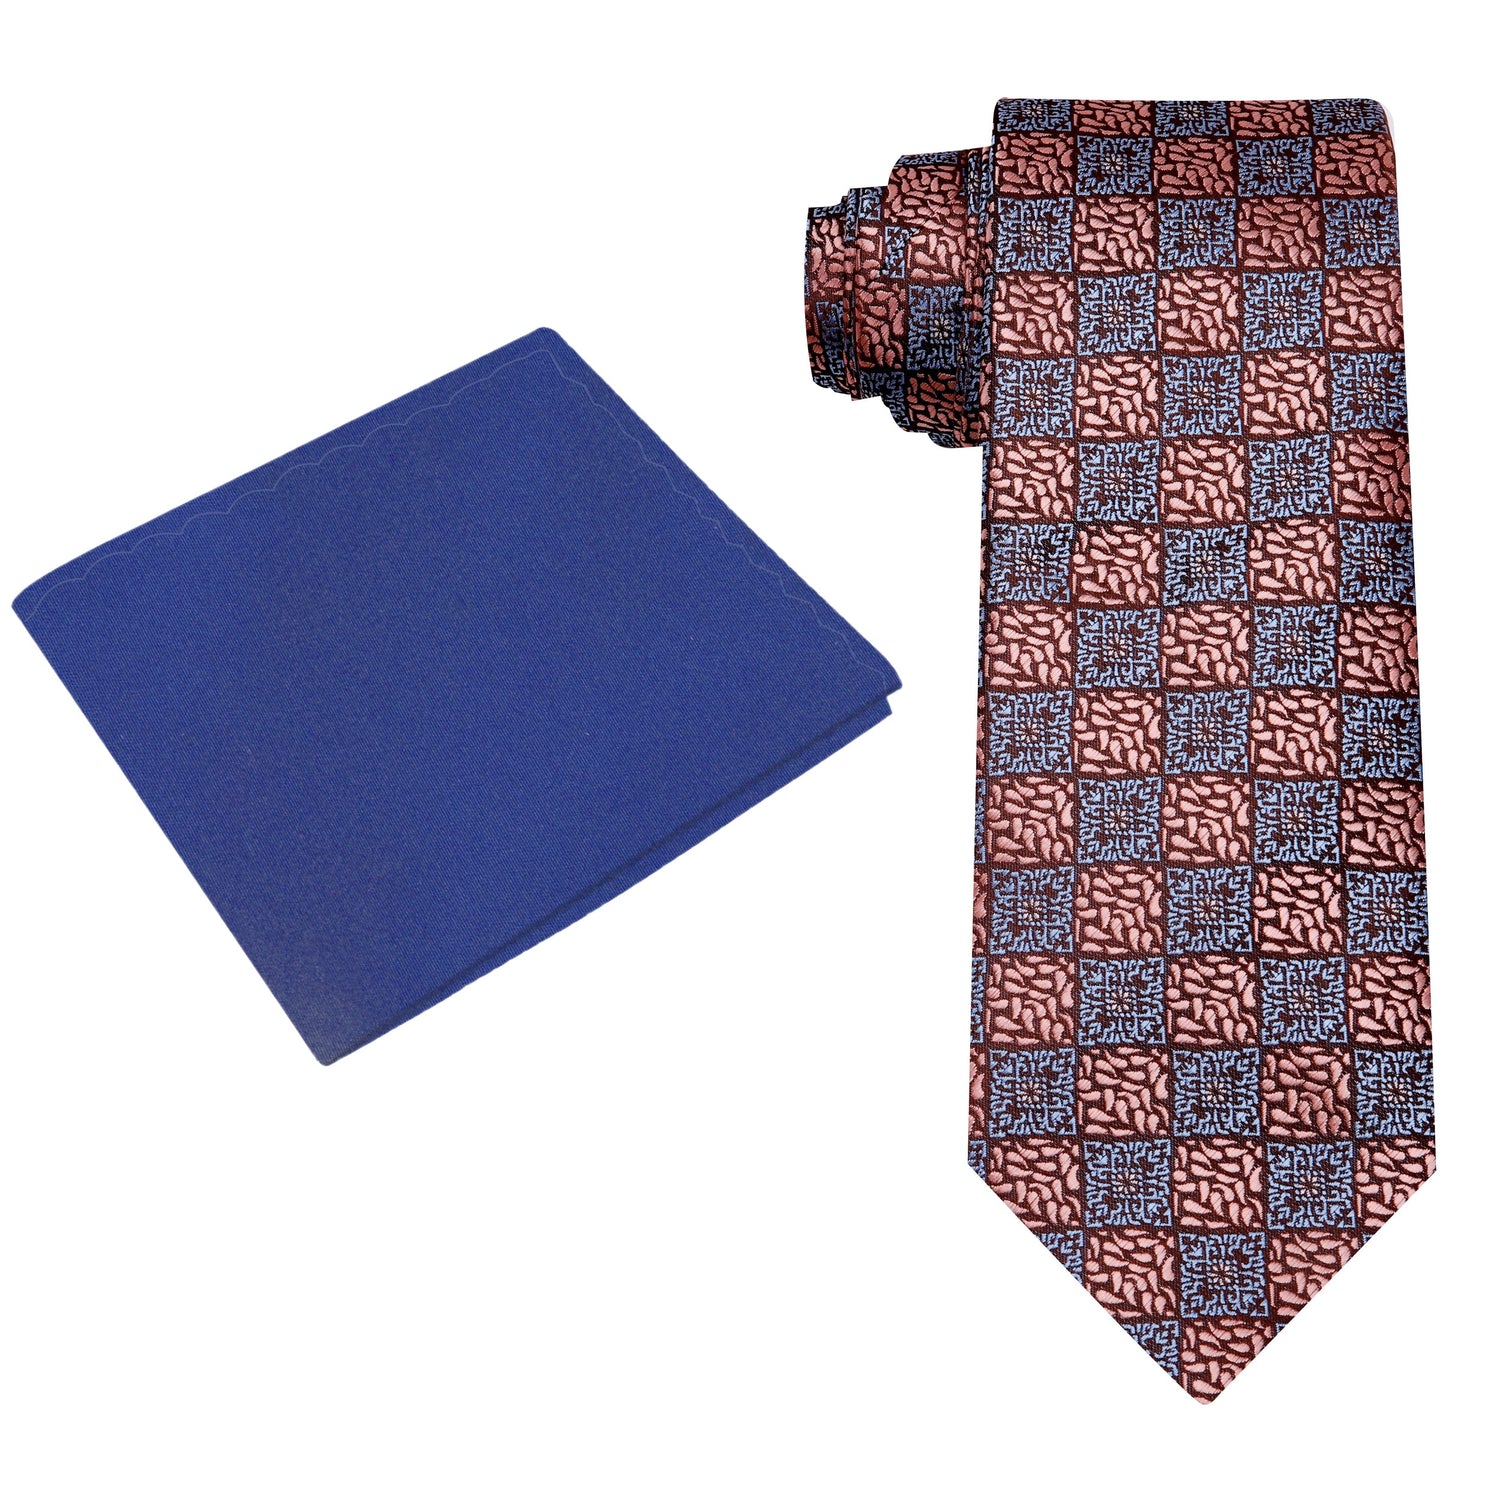 Alt View: Rose Gold Geometric Necktie and Blue Square